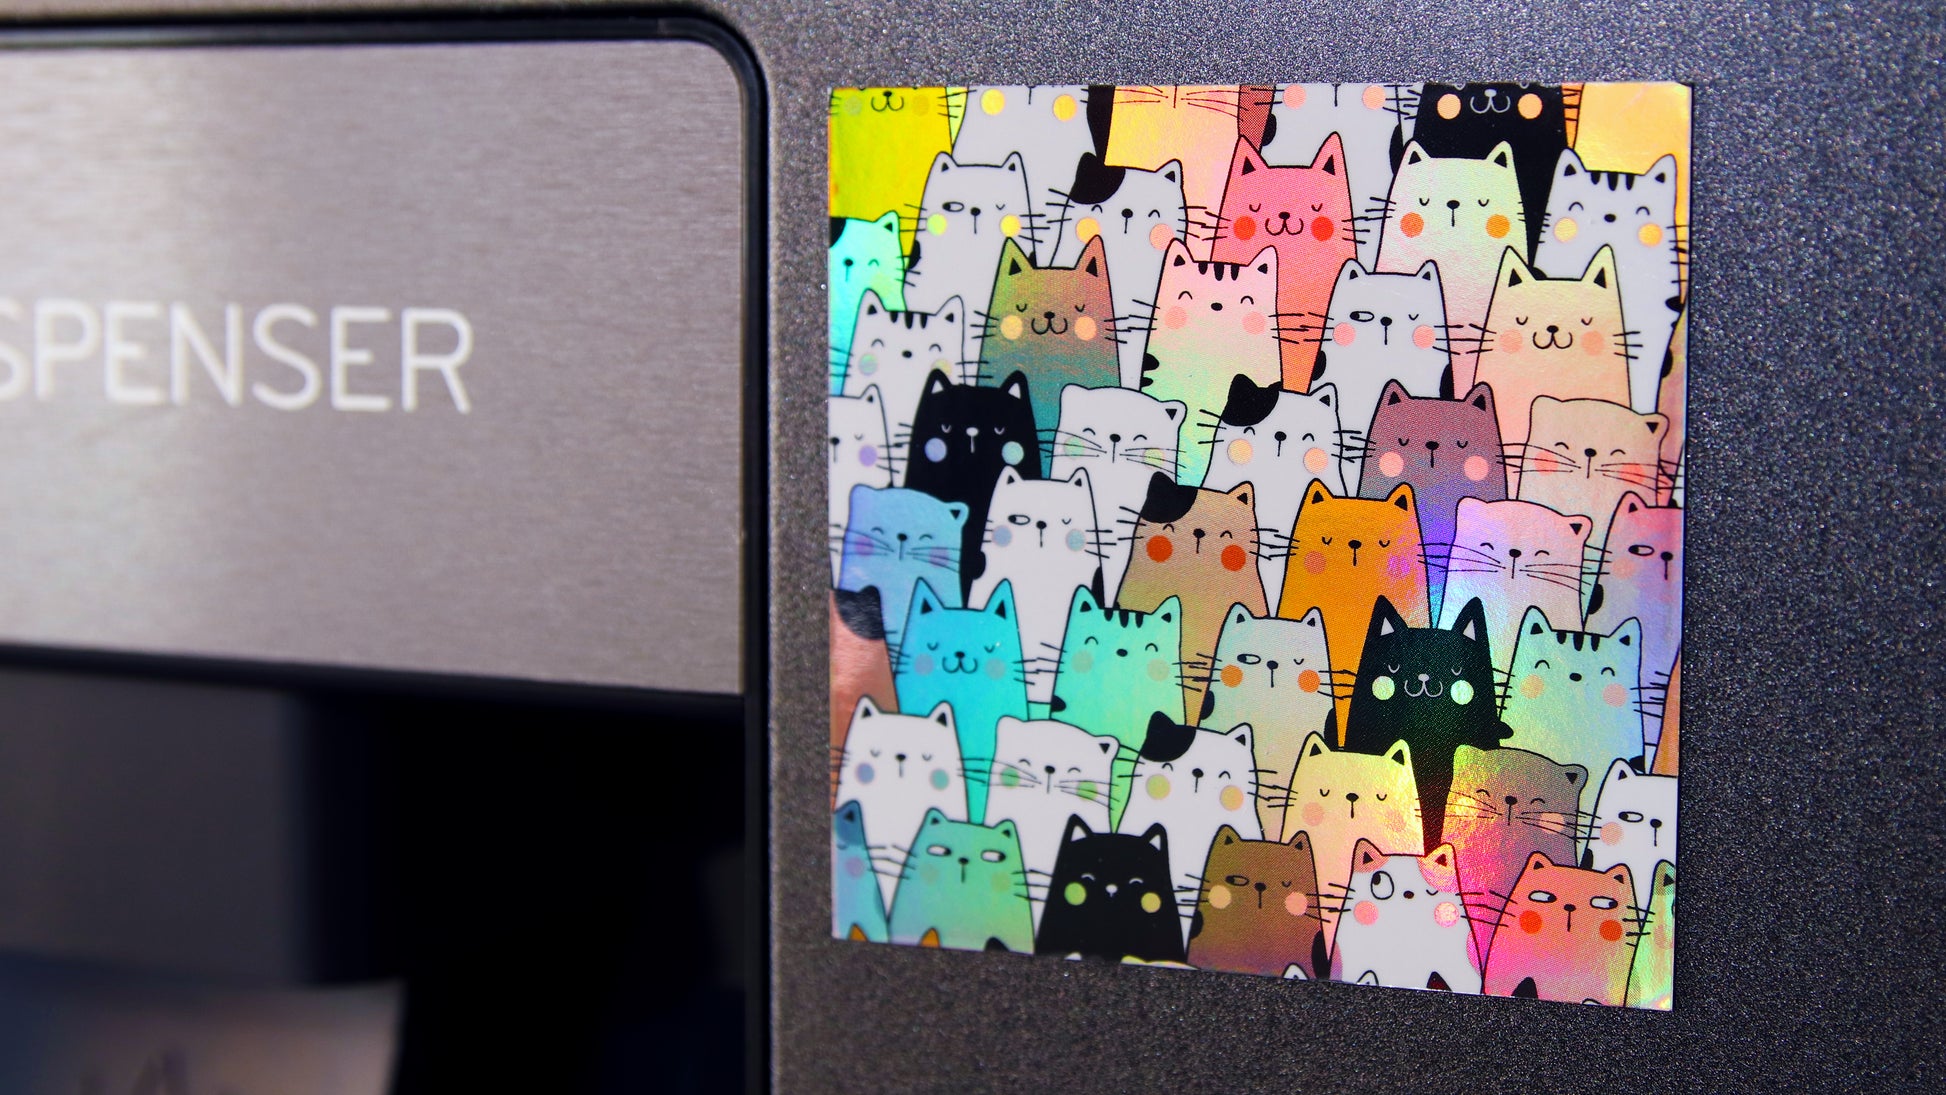 Square holographic custom printed magnet with lots of cats